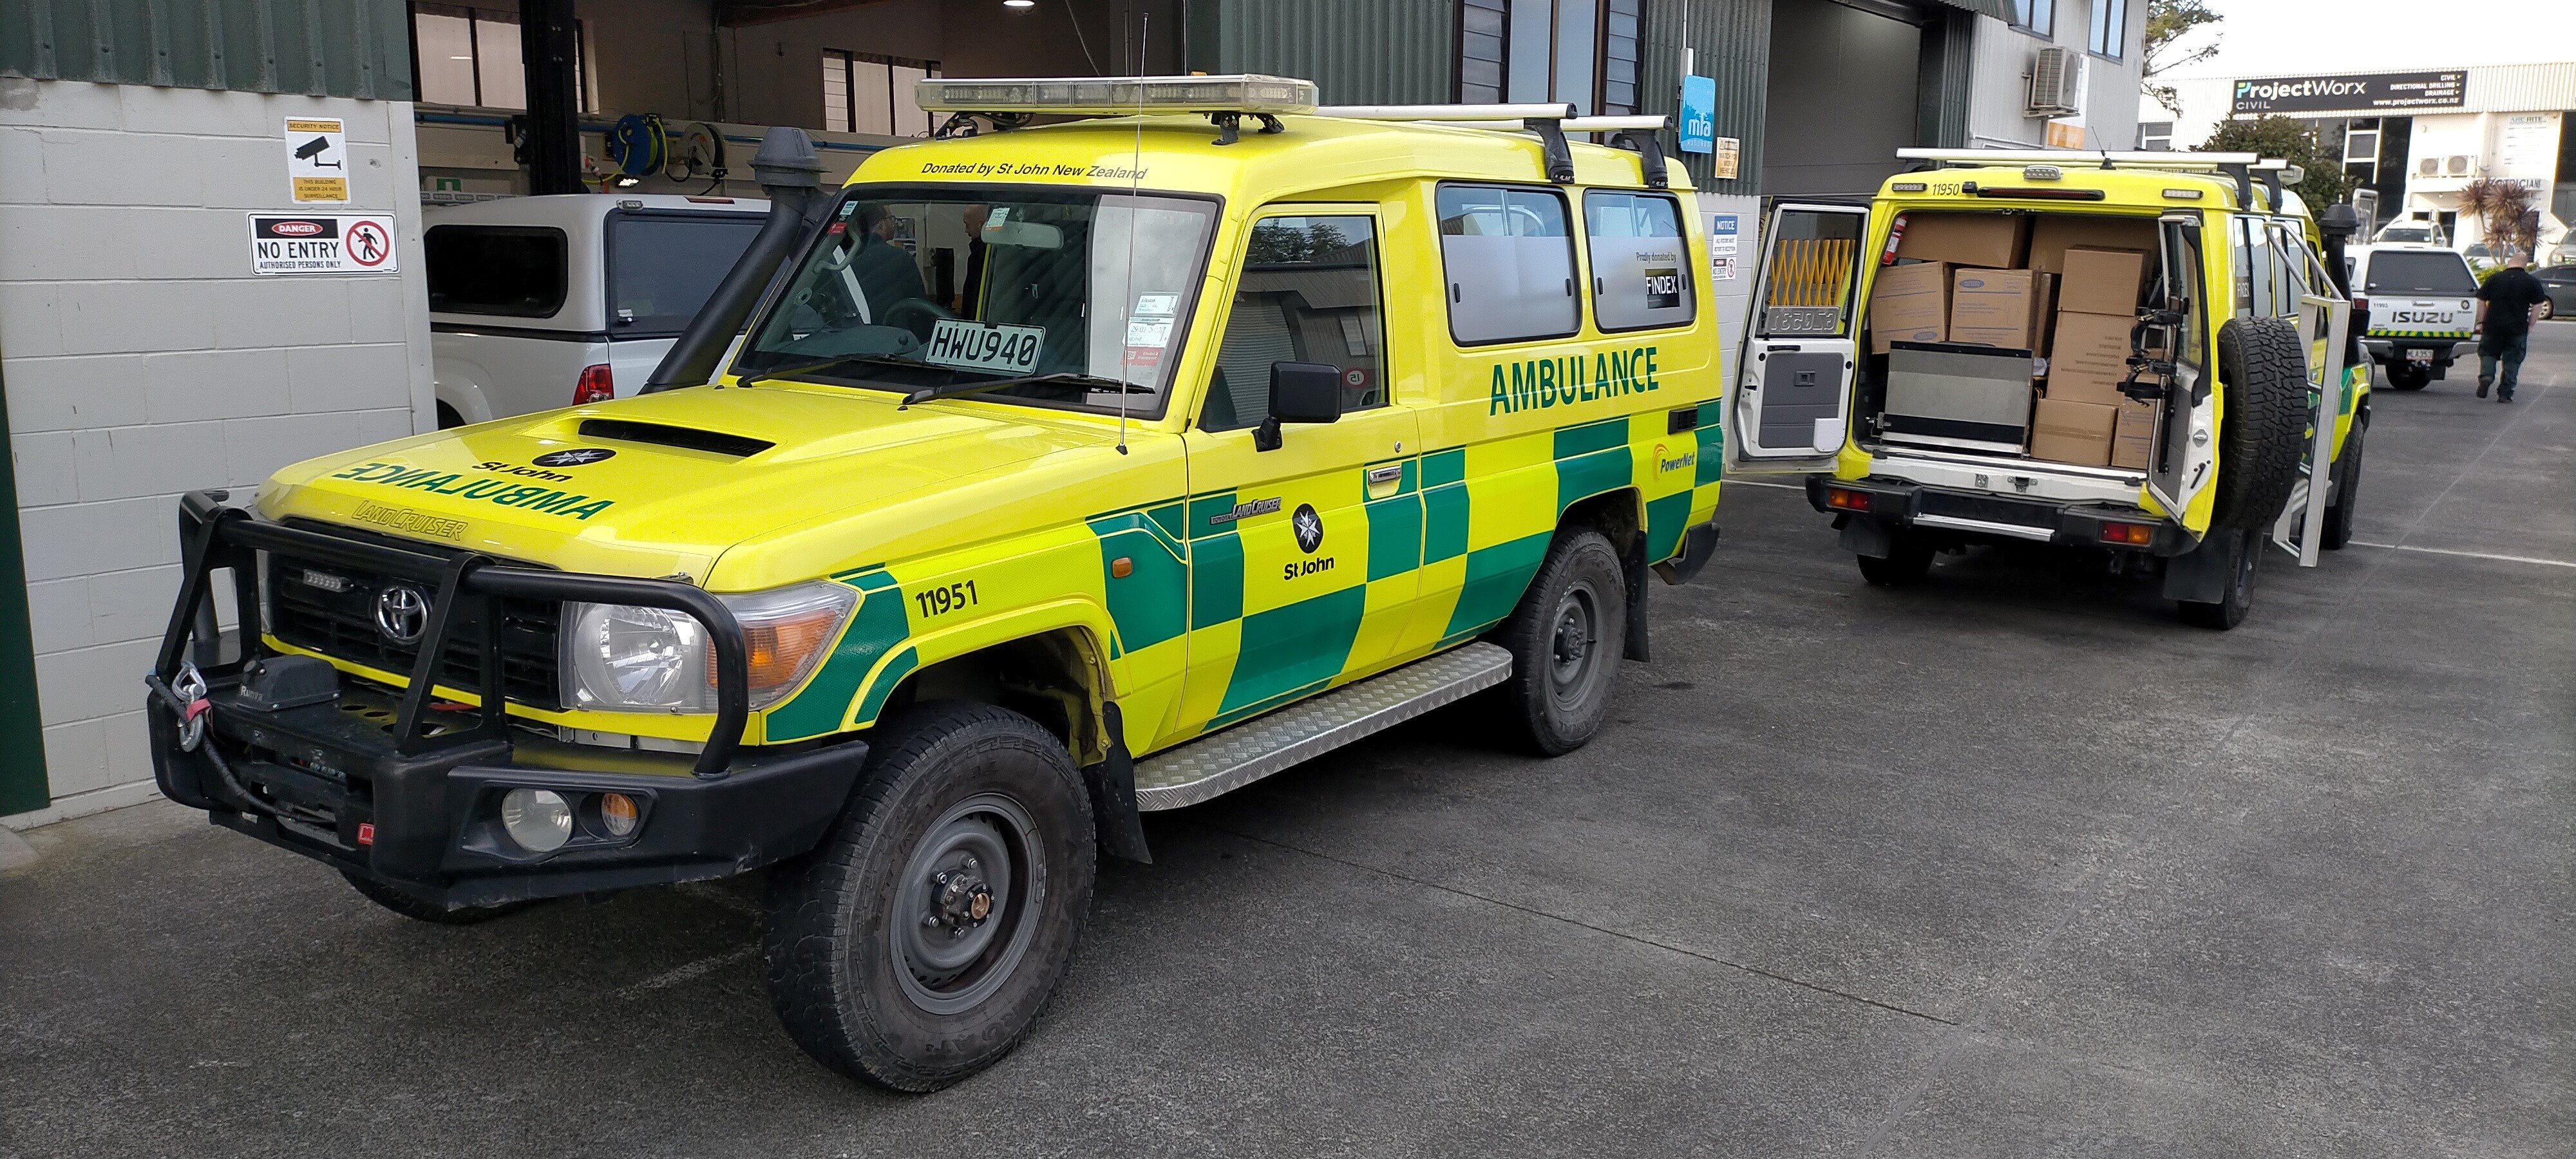 Former Queenstown Lakes area ambulances loaded with clinical equipment and medical supplies are...